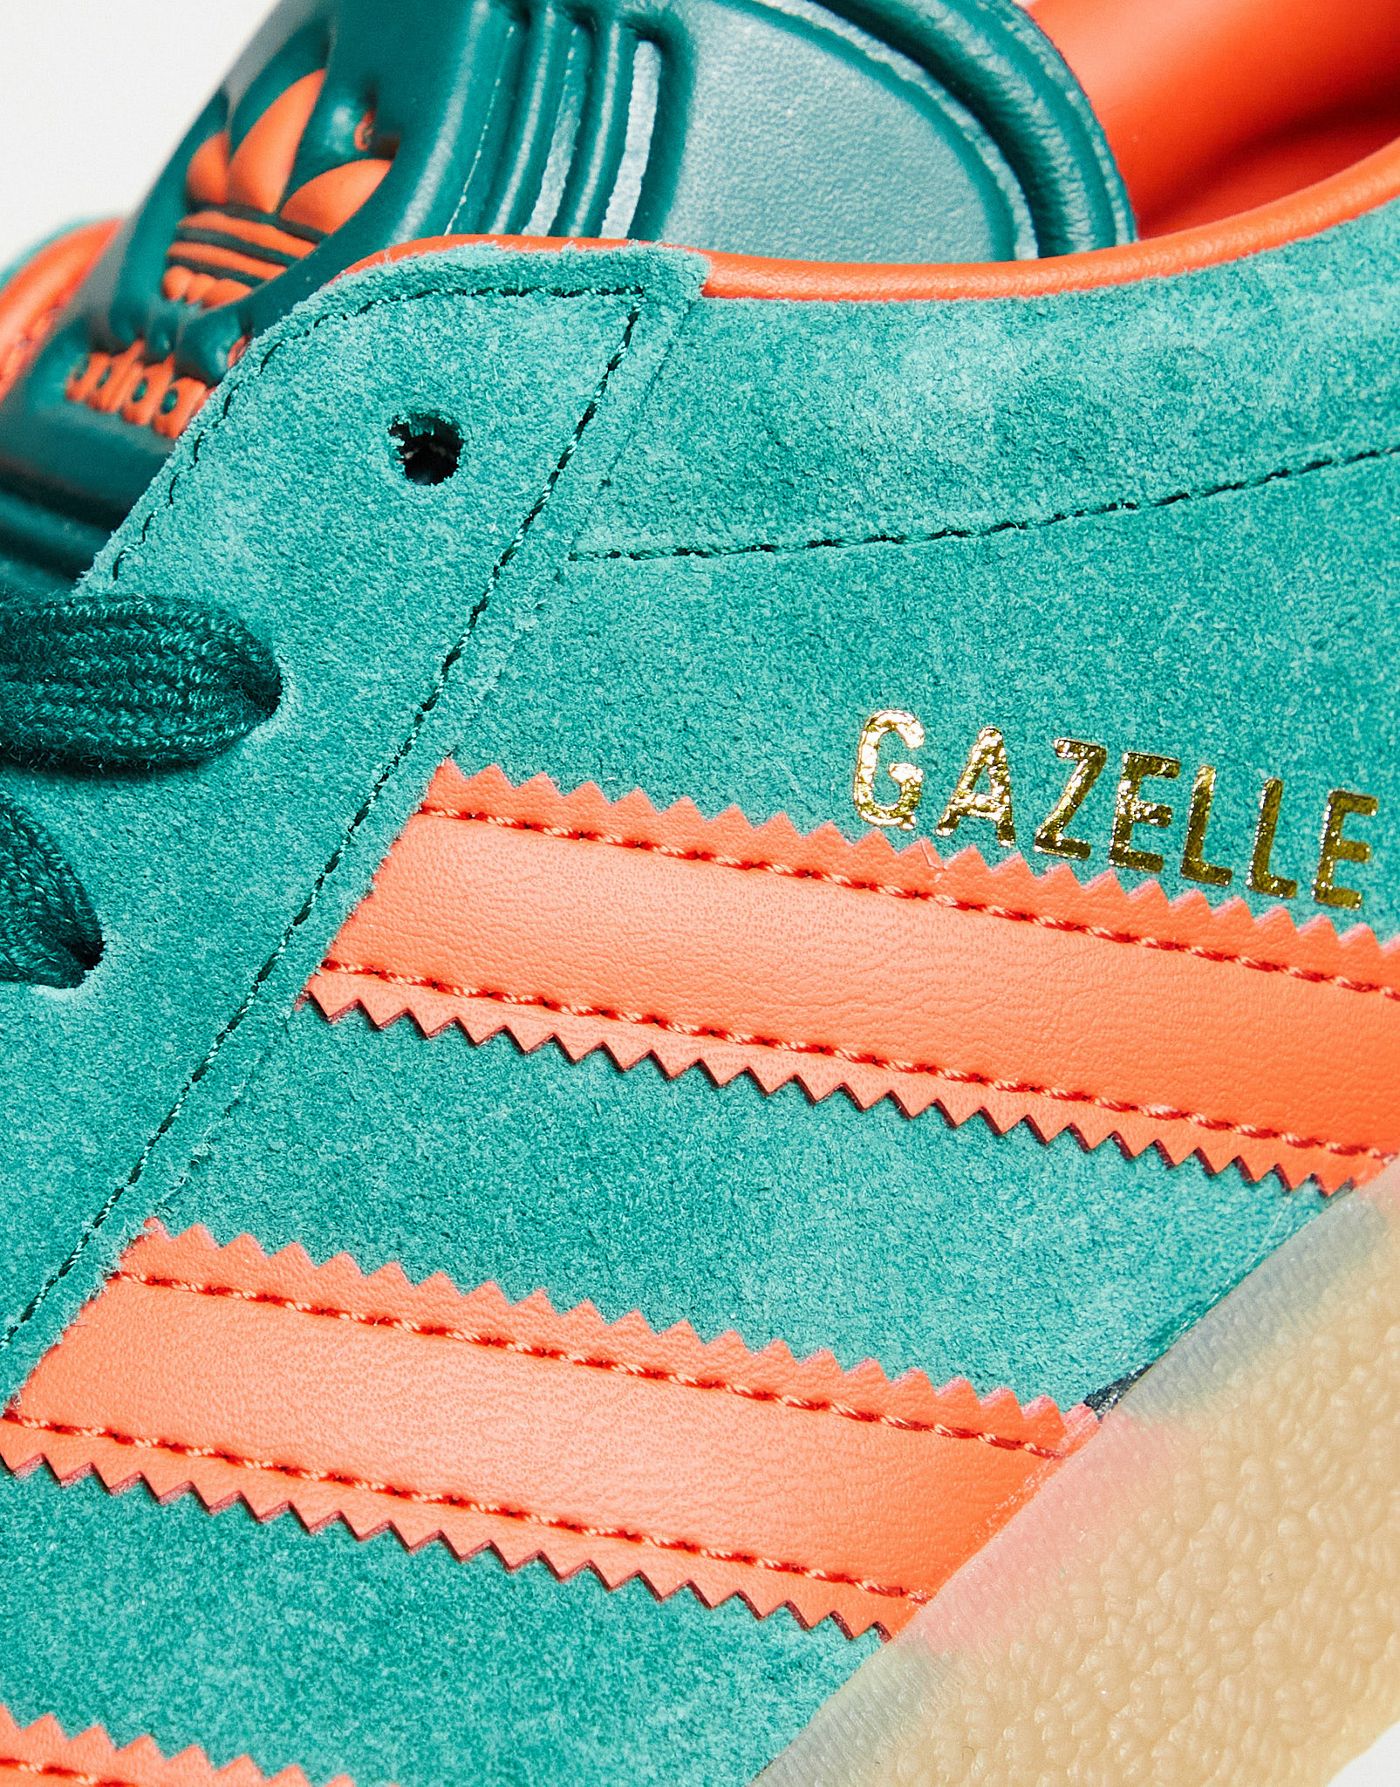 adidas Originals Gazelle trainers in green and red